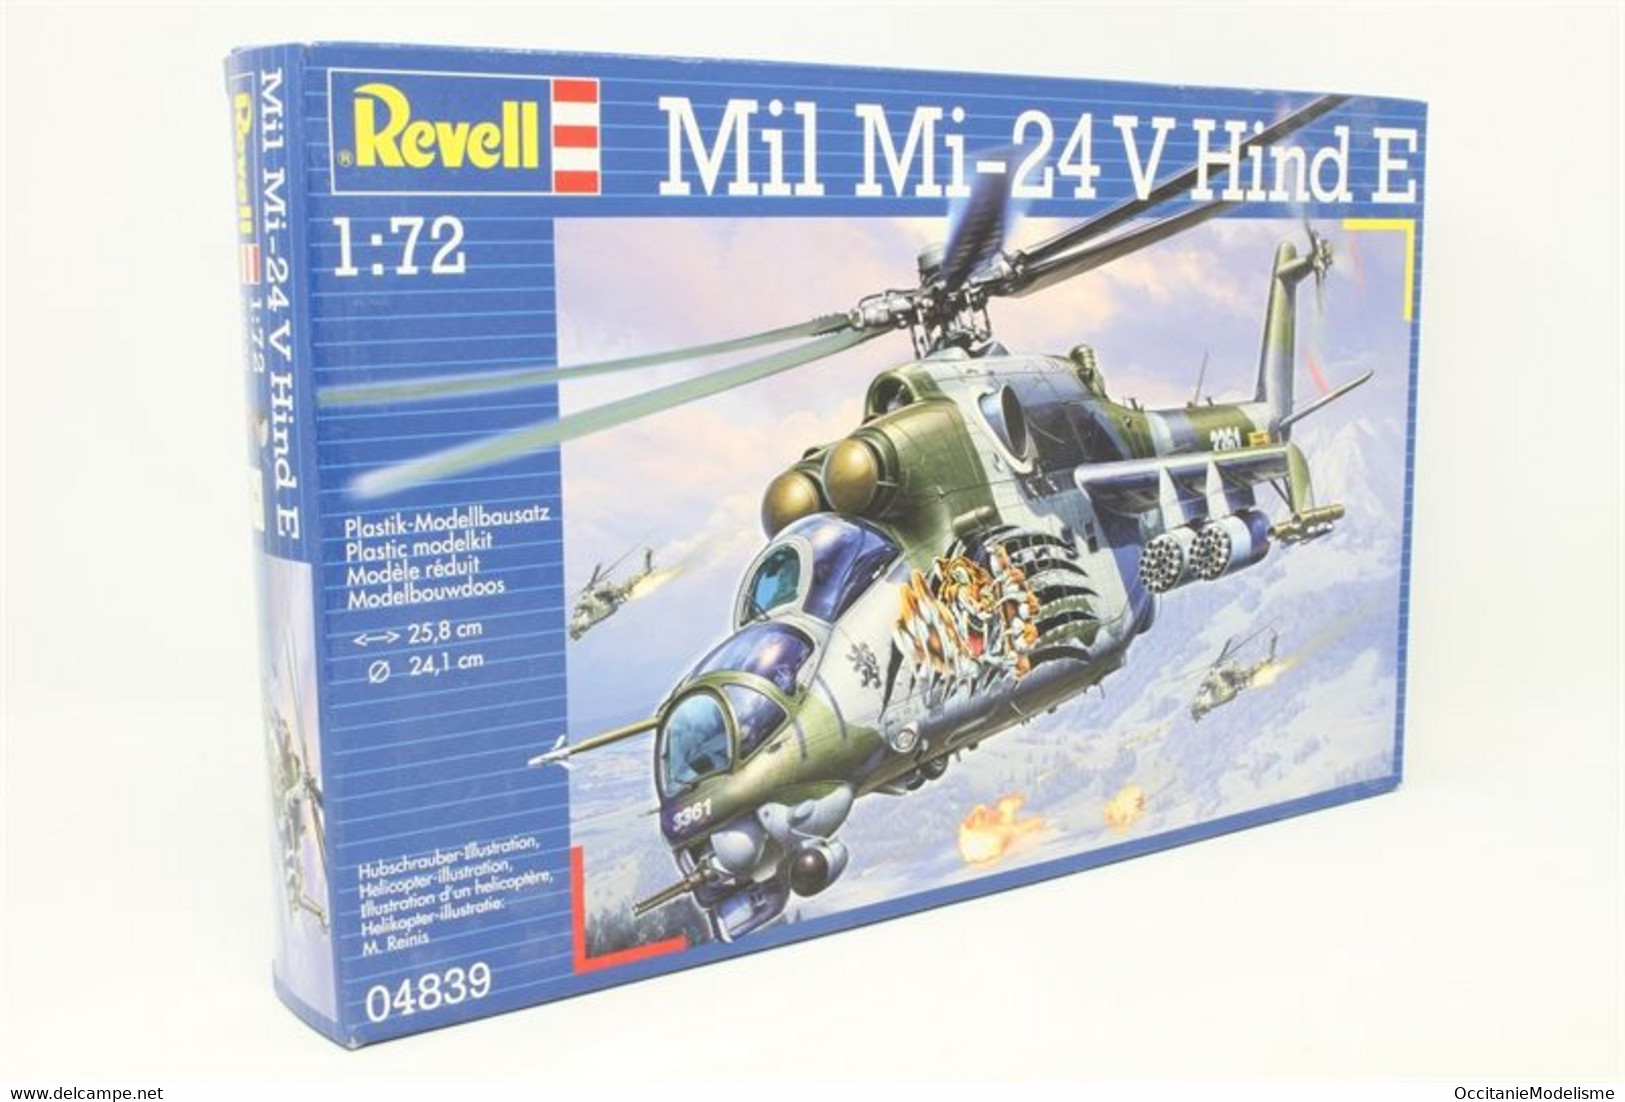 Revell - MIL Mi-24 V Hind E Maquette Hélicoptère Kit Plastique Réf. 04839 Neuf NBO 1/72 - Helicopters